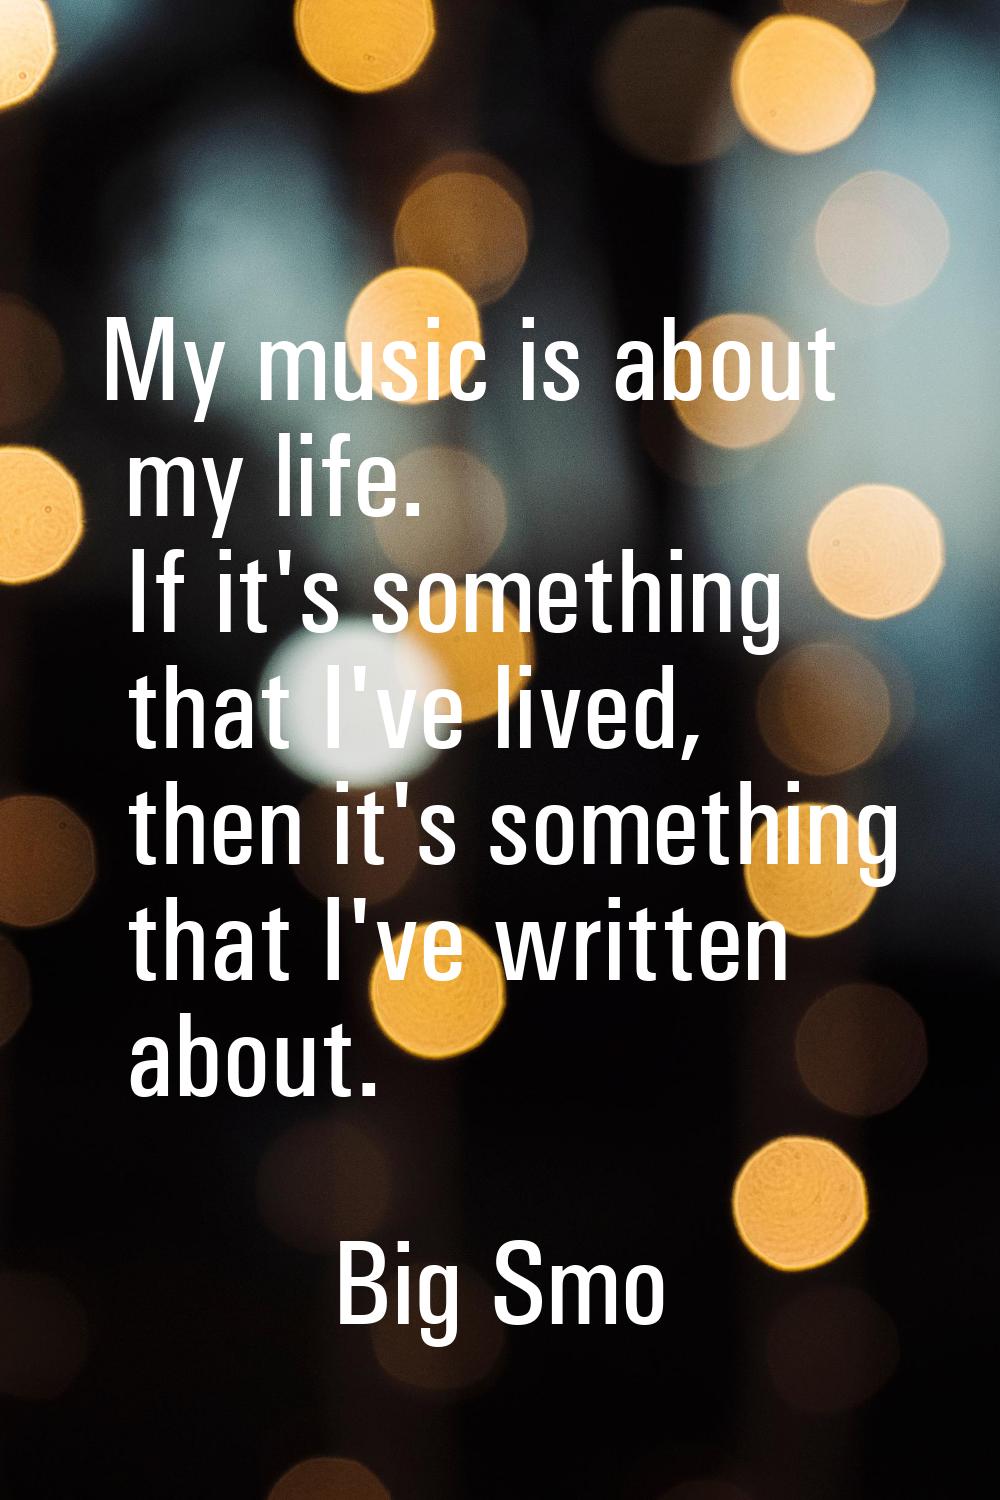 My music is about my life. If it's something that I've lived, then it's something that I've written